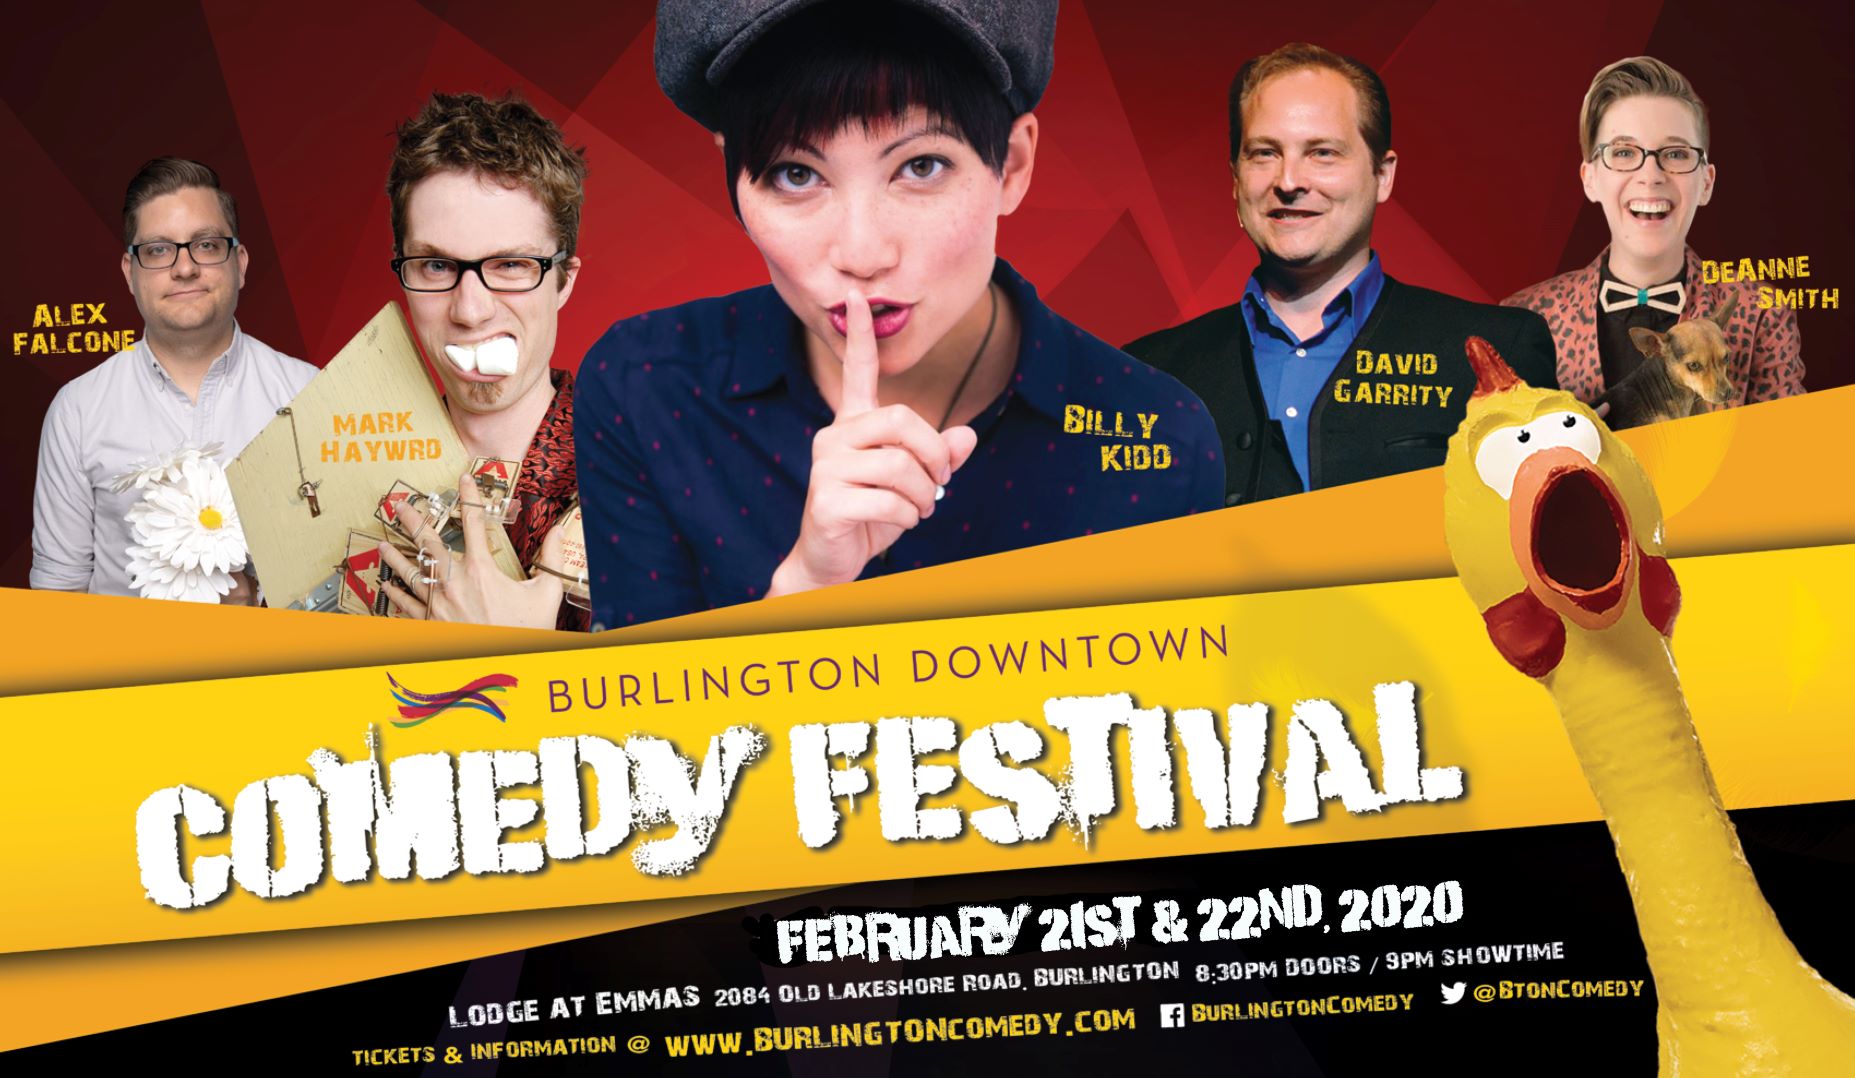 Comedy Cabaret featuring Billy Kidd